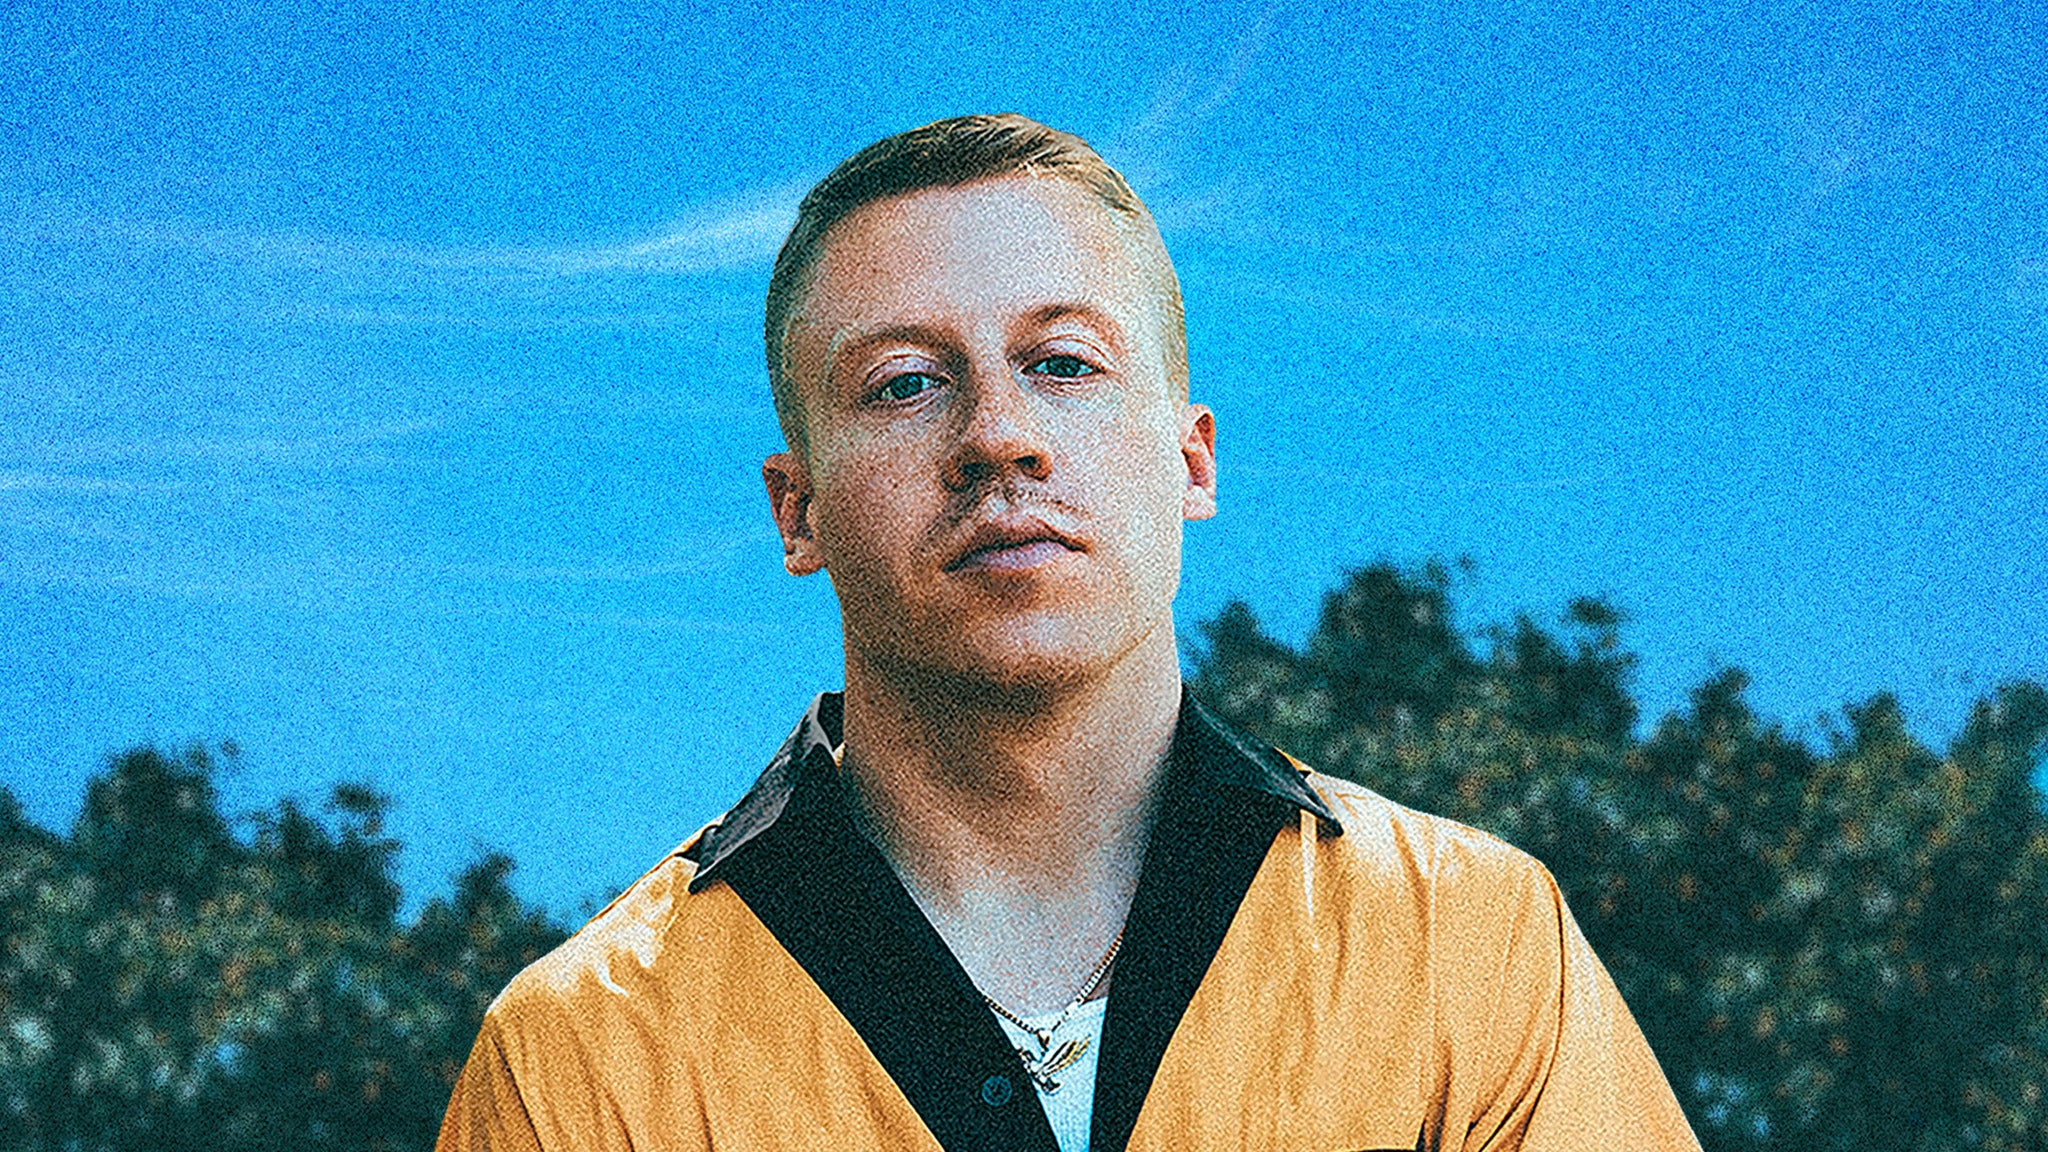 Image used with permission from Ticketmaster | Macklemore tickets